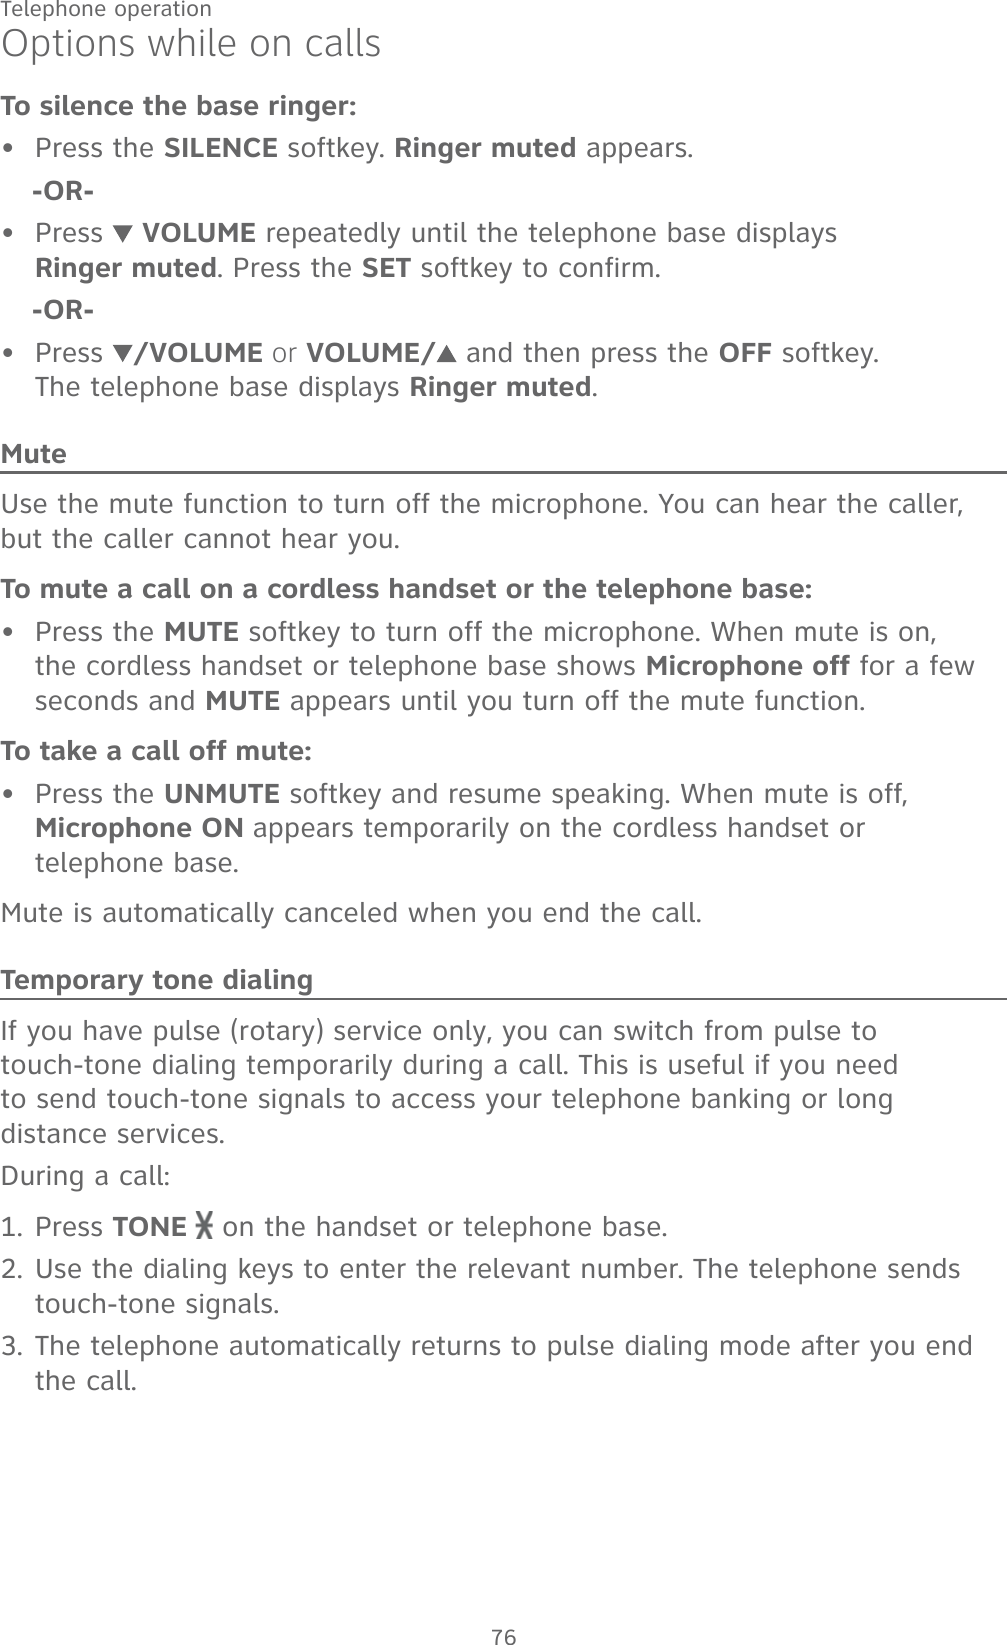 76Telephone operationOptions while on callsTo silence the base ringer:Press the SILENCE softkey. Ringer muted appears.-OR-Press   VOLUME repeatedly until the telephone base displays  Ringer muted. Press the SET softkey to confirm.-OR-Press  /VOLUME or VOLUME/  and then press the OFF softkey.  The telephone base displays Ringer muted.MuteUse the mute function to turn off the microphone. You can hear the caller, but the caller cannot hear you.To mute a call on a cordless handset or the telephone base:Press the MUTE softkey to turn off the microphone. When mute is on, the cordless handset or telephone base shows Microphone off for a few seconds and MUTE appears until you turn off the mute function.To take a call off mute:Press the UNMUTE softkey and resume speaking. When mute is off, Microphone ON appears temporarily on the cordless handset or  telephone base.Mute is automatically canceled when you end the call.Temporary tone dialingIf you have pulse (rotary) service only, you can switch from pulse to touch-tone dialing temporarily during a call. This is useful if you need to send touch-tone signals to access your telephone banking or long distance services.During a call:Press TONE   on the handset or telephone base.Use the dialing keys to enter the relevant number. The telephone sends touch-tone signals.The telephone automatically returns to pulse dialing mode after you end the call.•••••1.2.3.